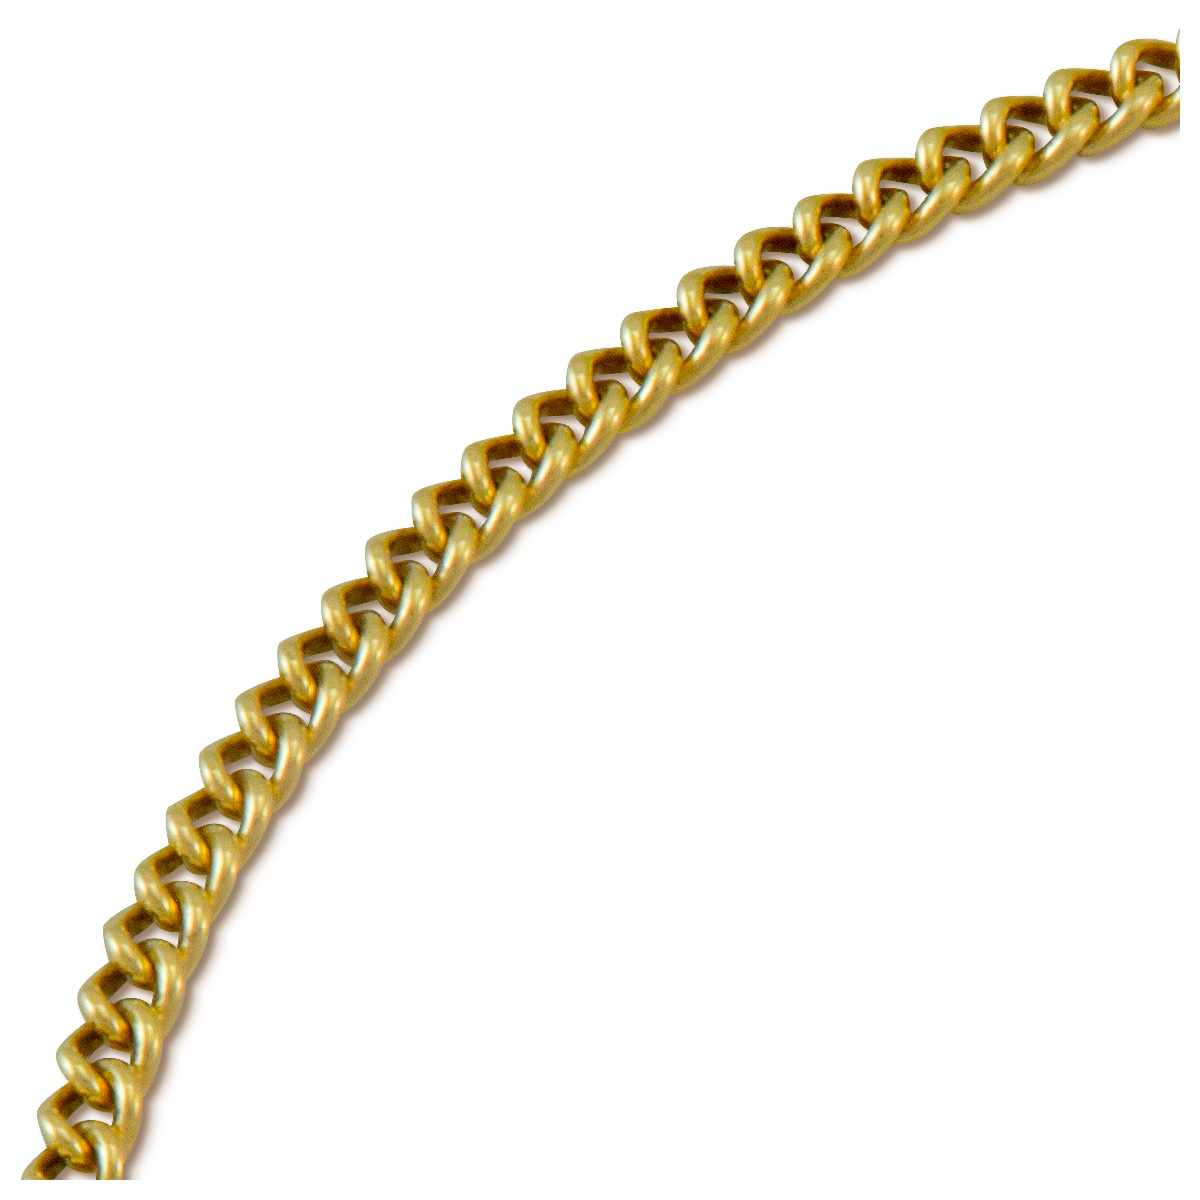 Pocket watch chain, fine, gold plated brass, length 35 cm